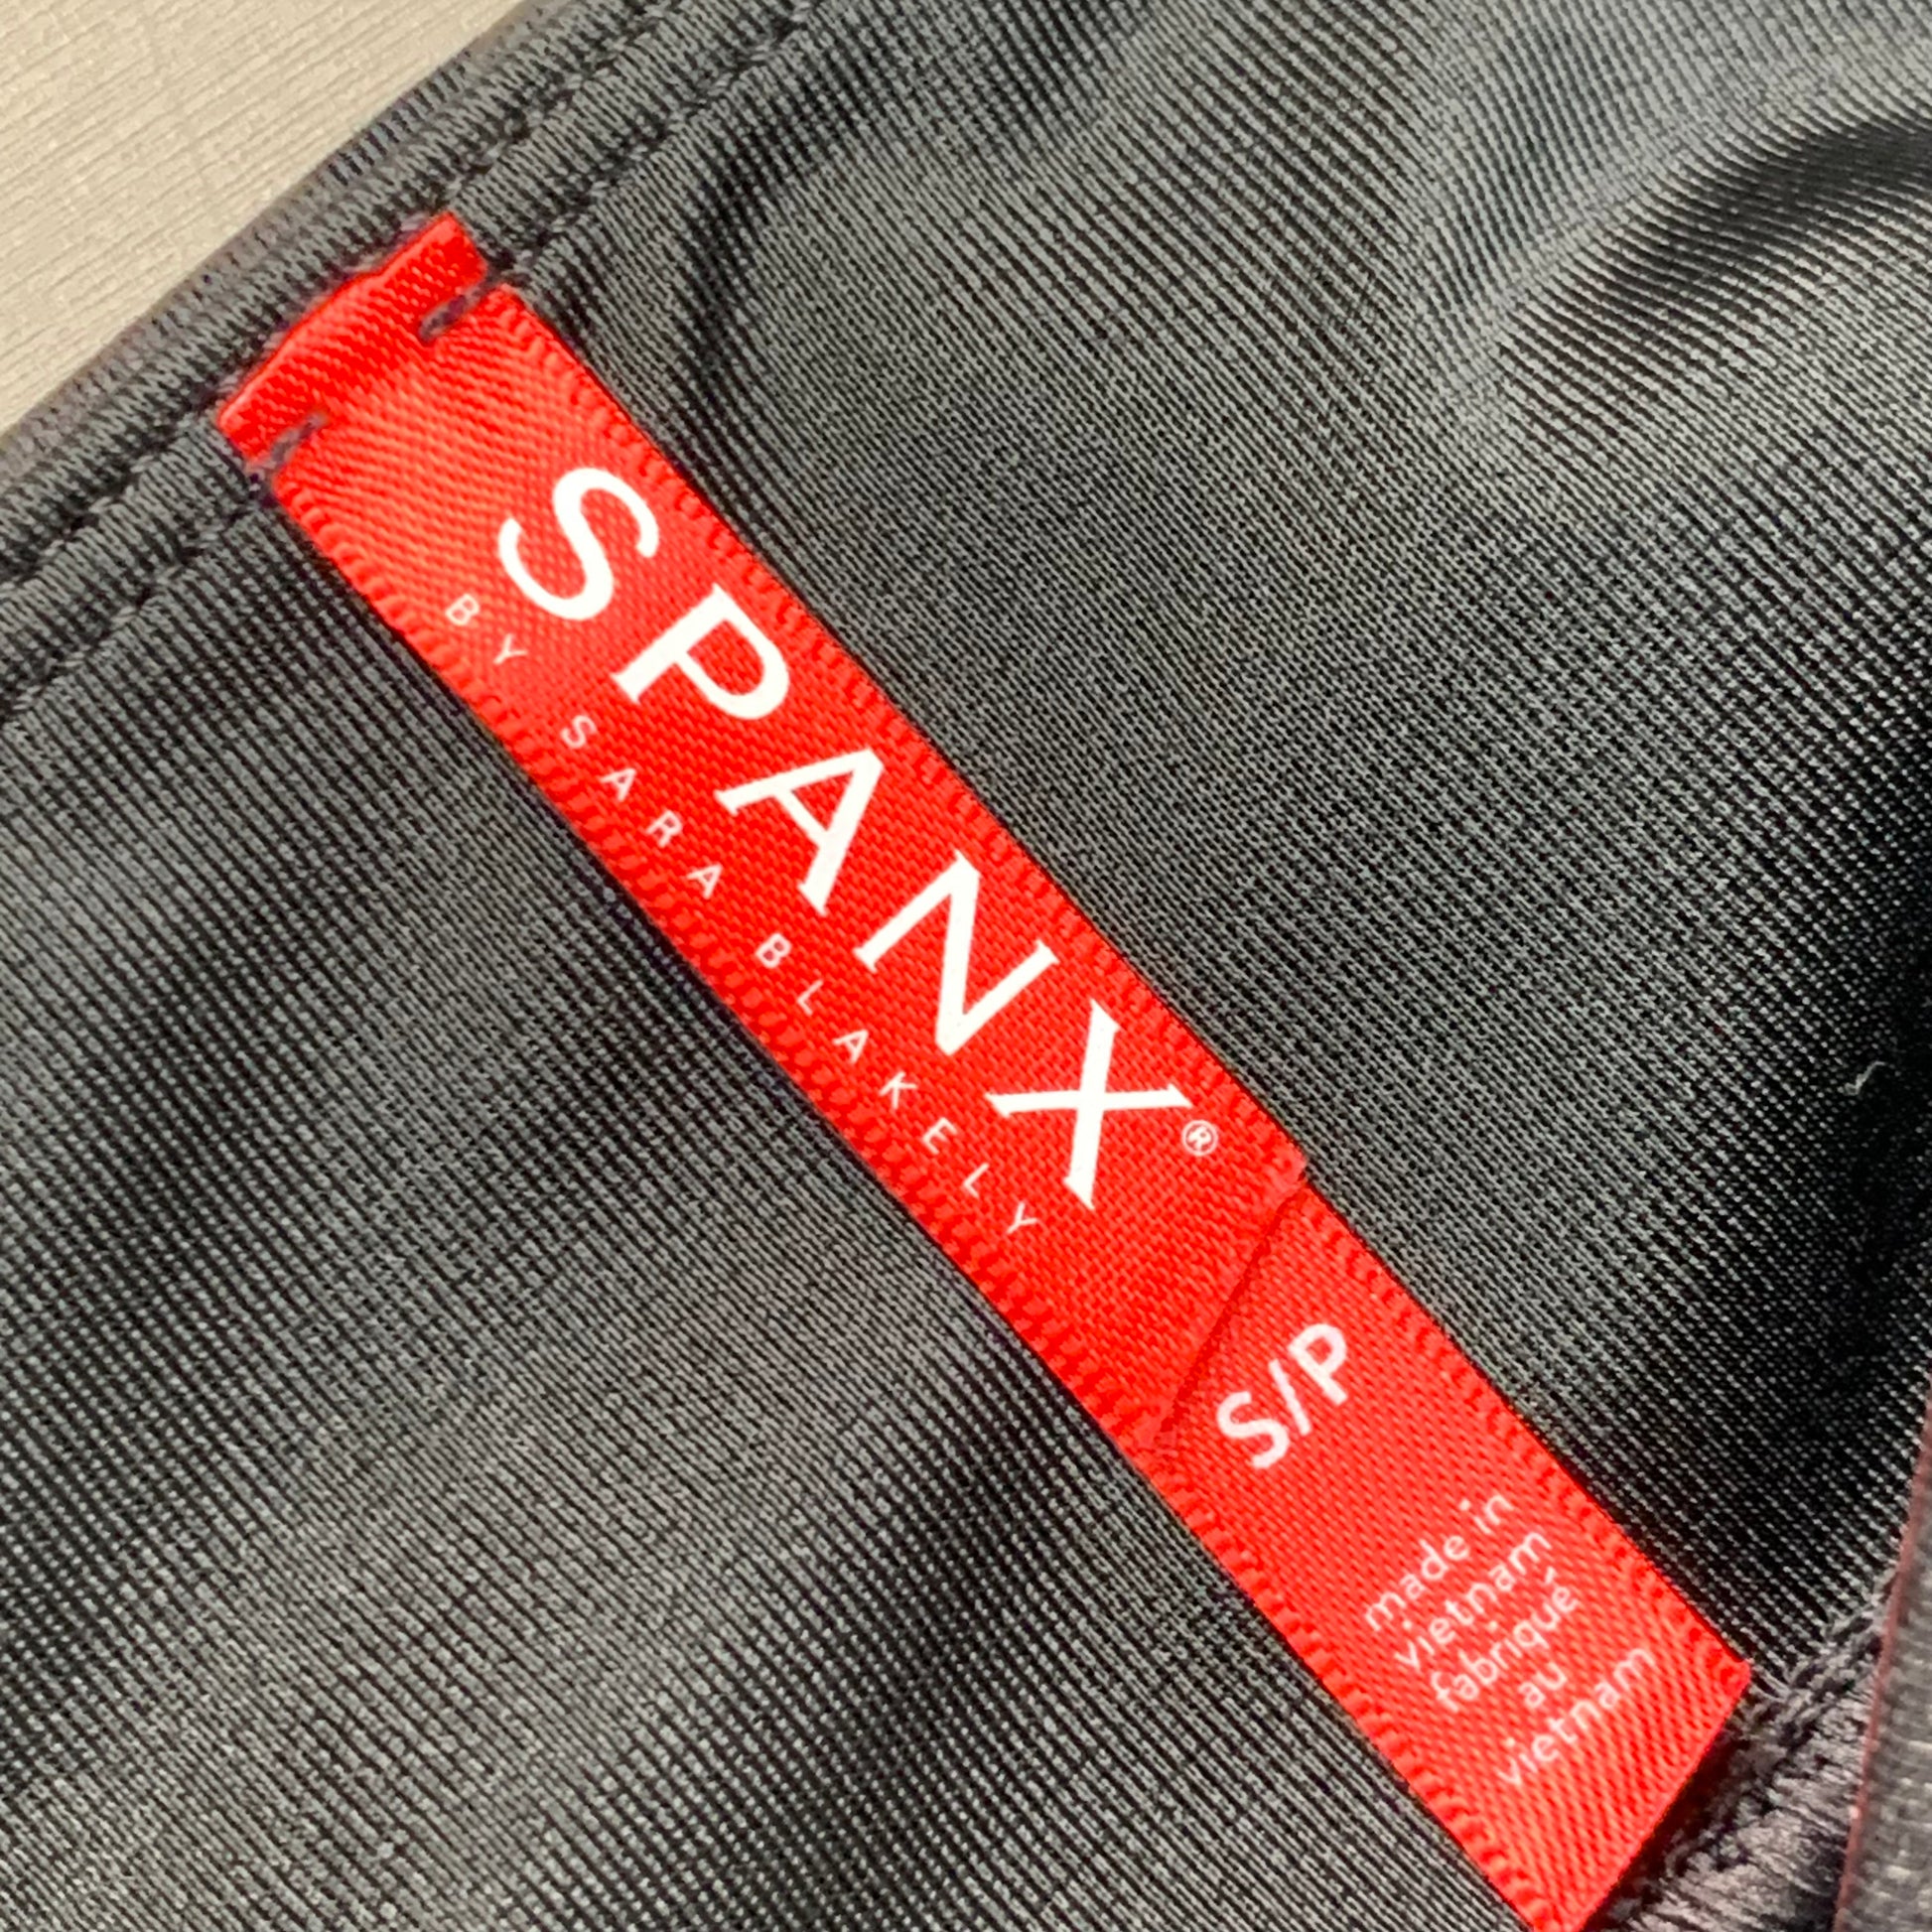 SPANX, Pants & Jumpsuits, Spanx 285 Faux Leather Black Camo Leggings  Small